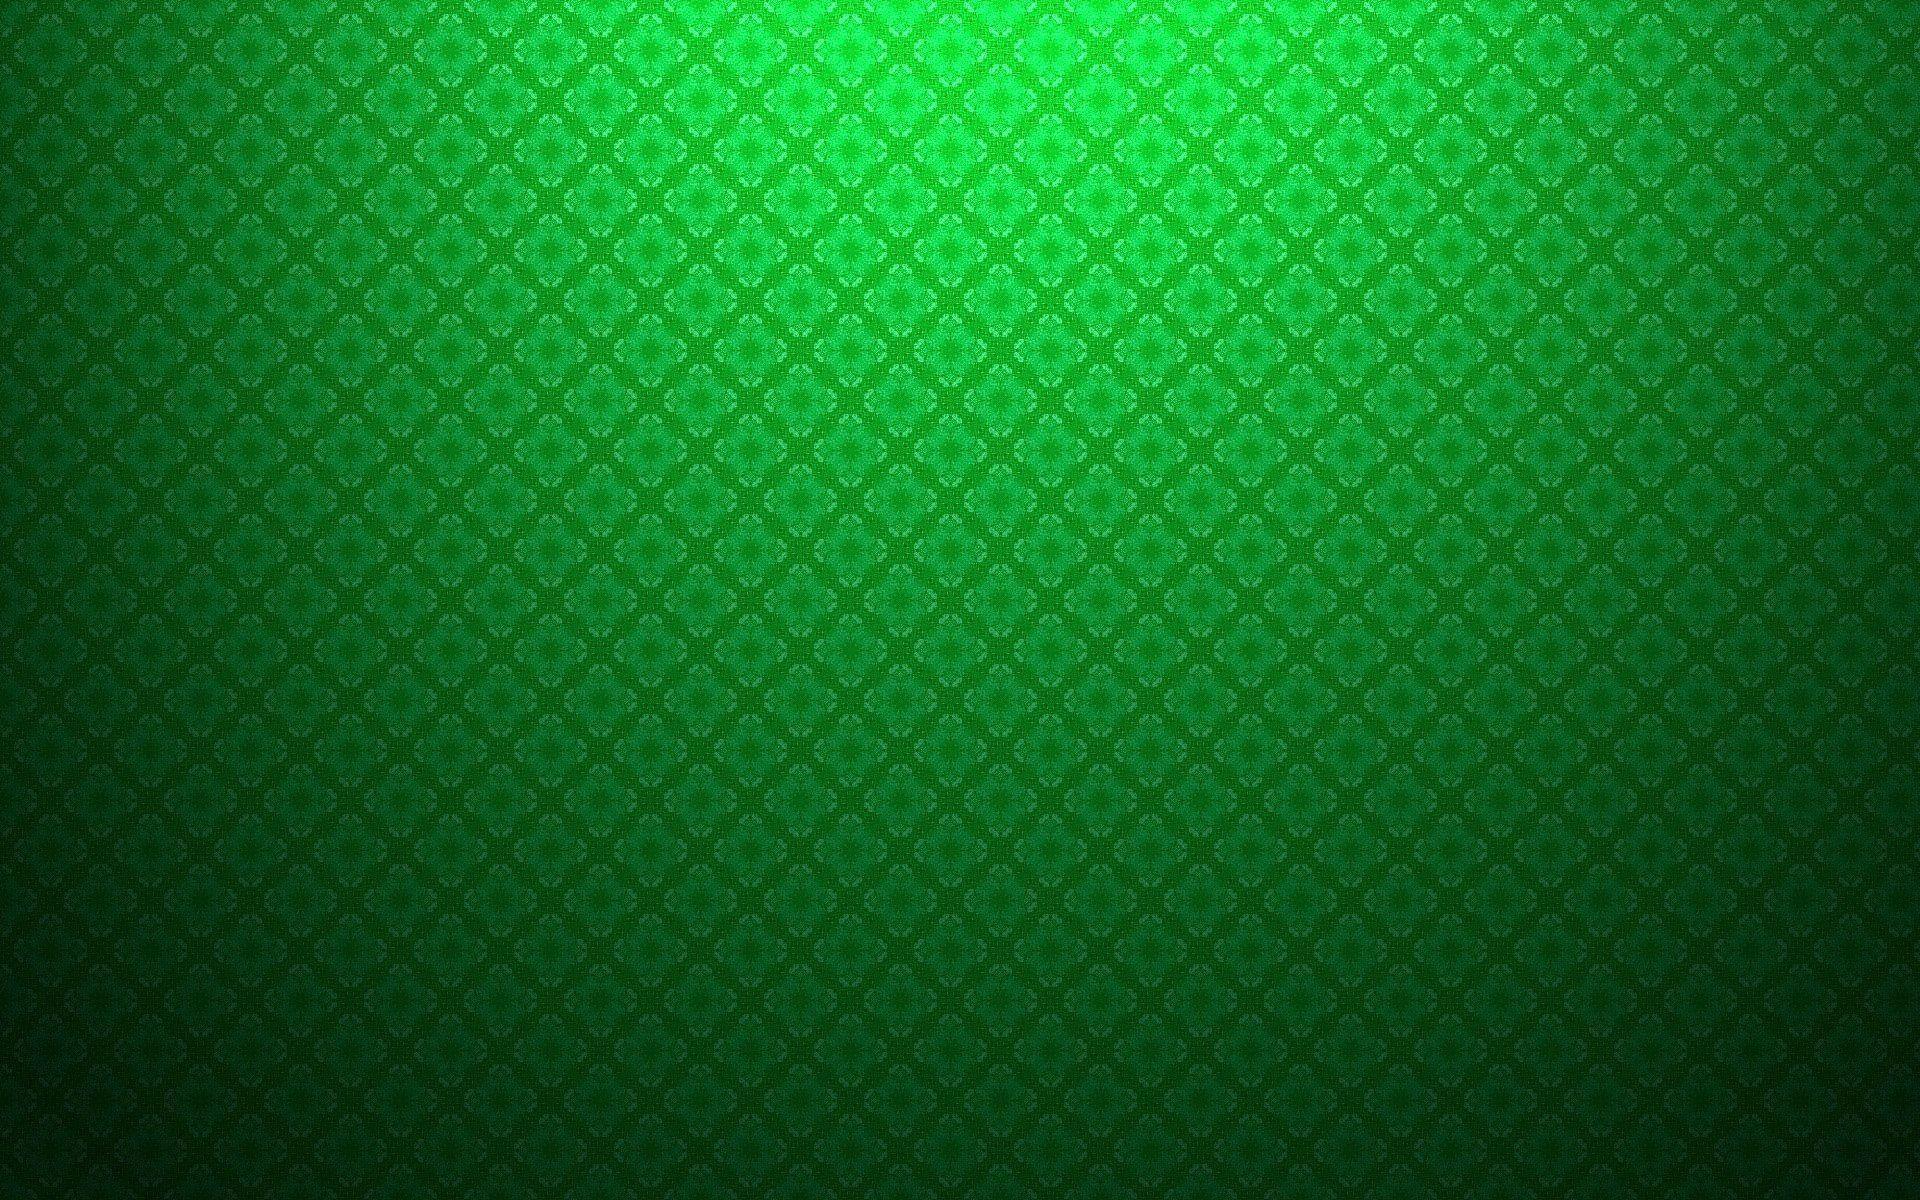 Green Background Vectors Photo and PSD files Free Download. HD